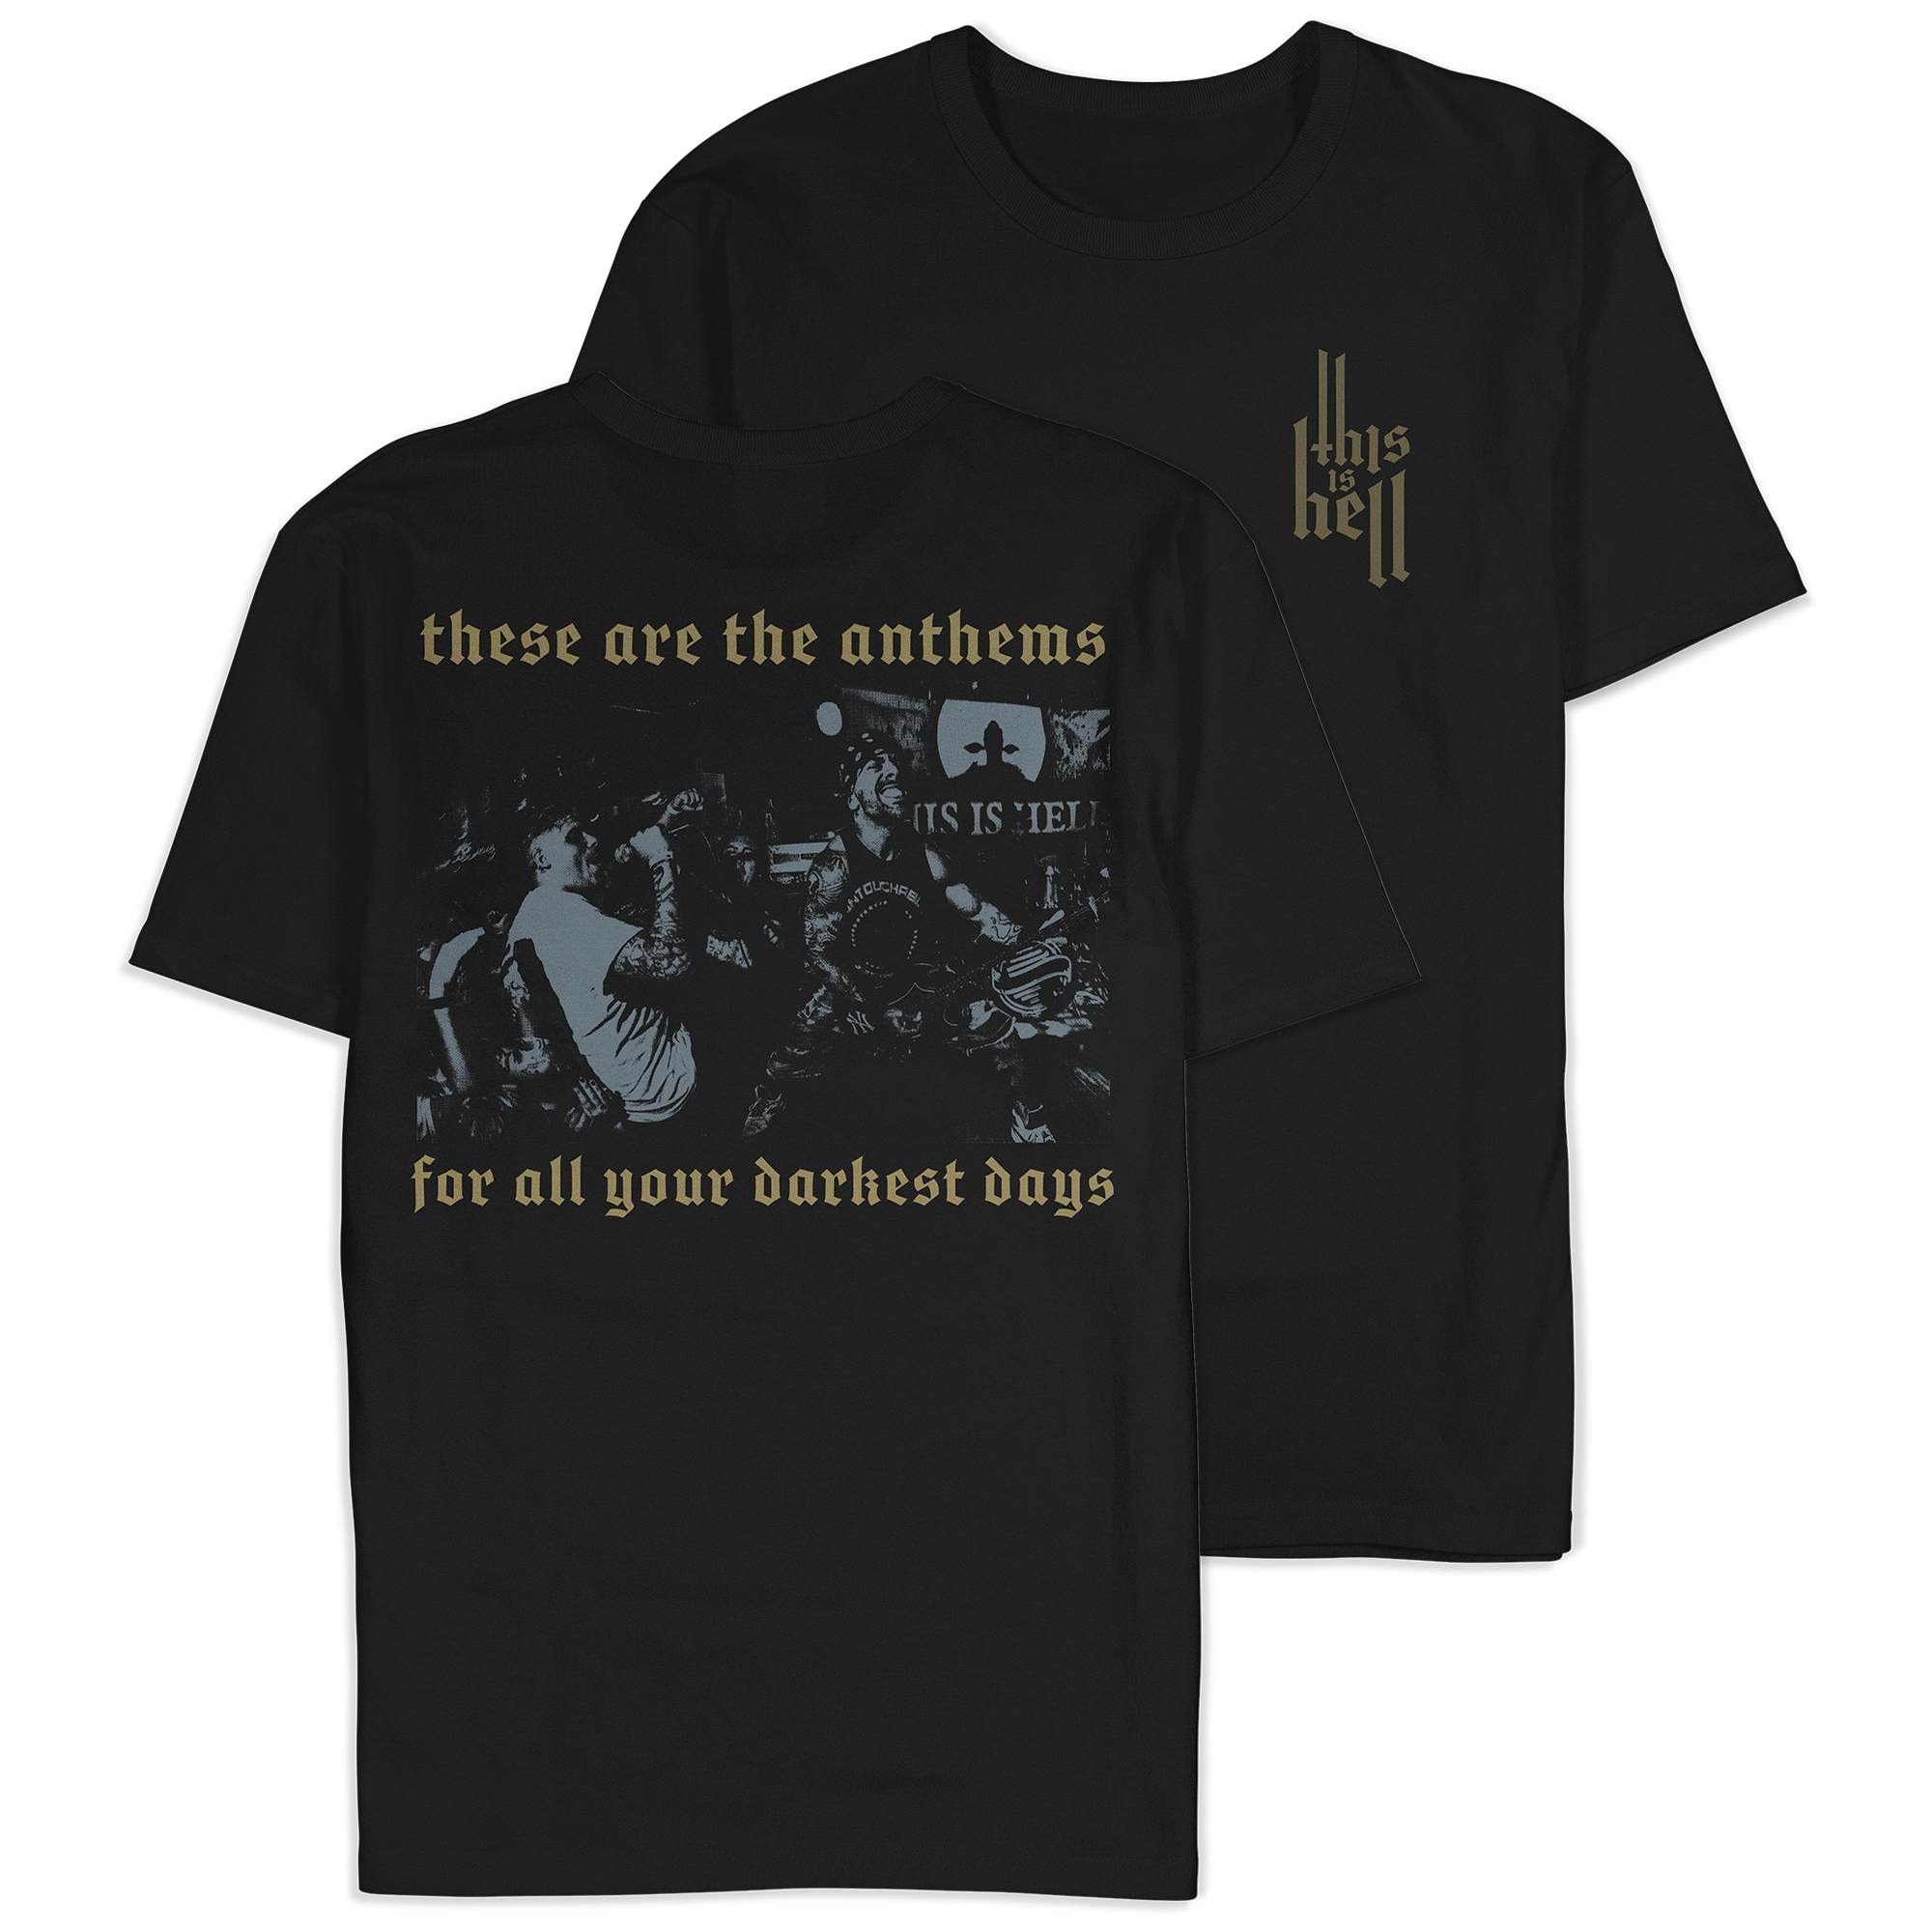 This Is Hell - Anthems Shirt